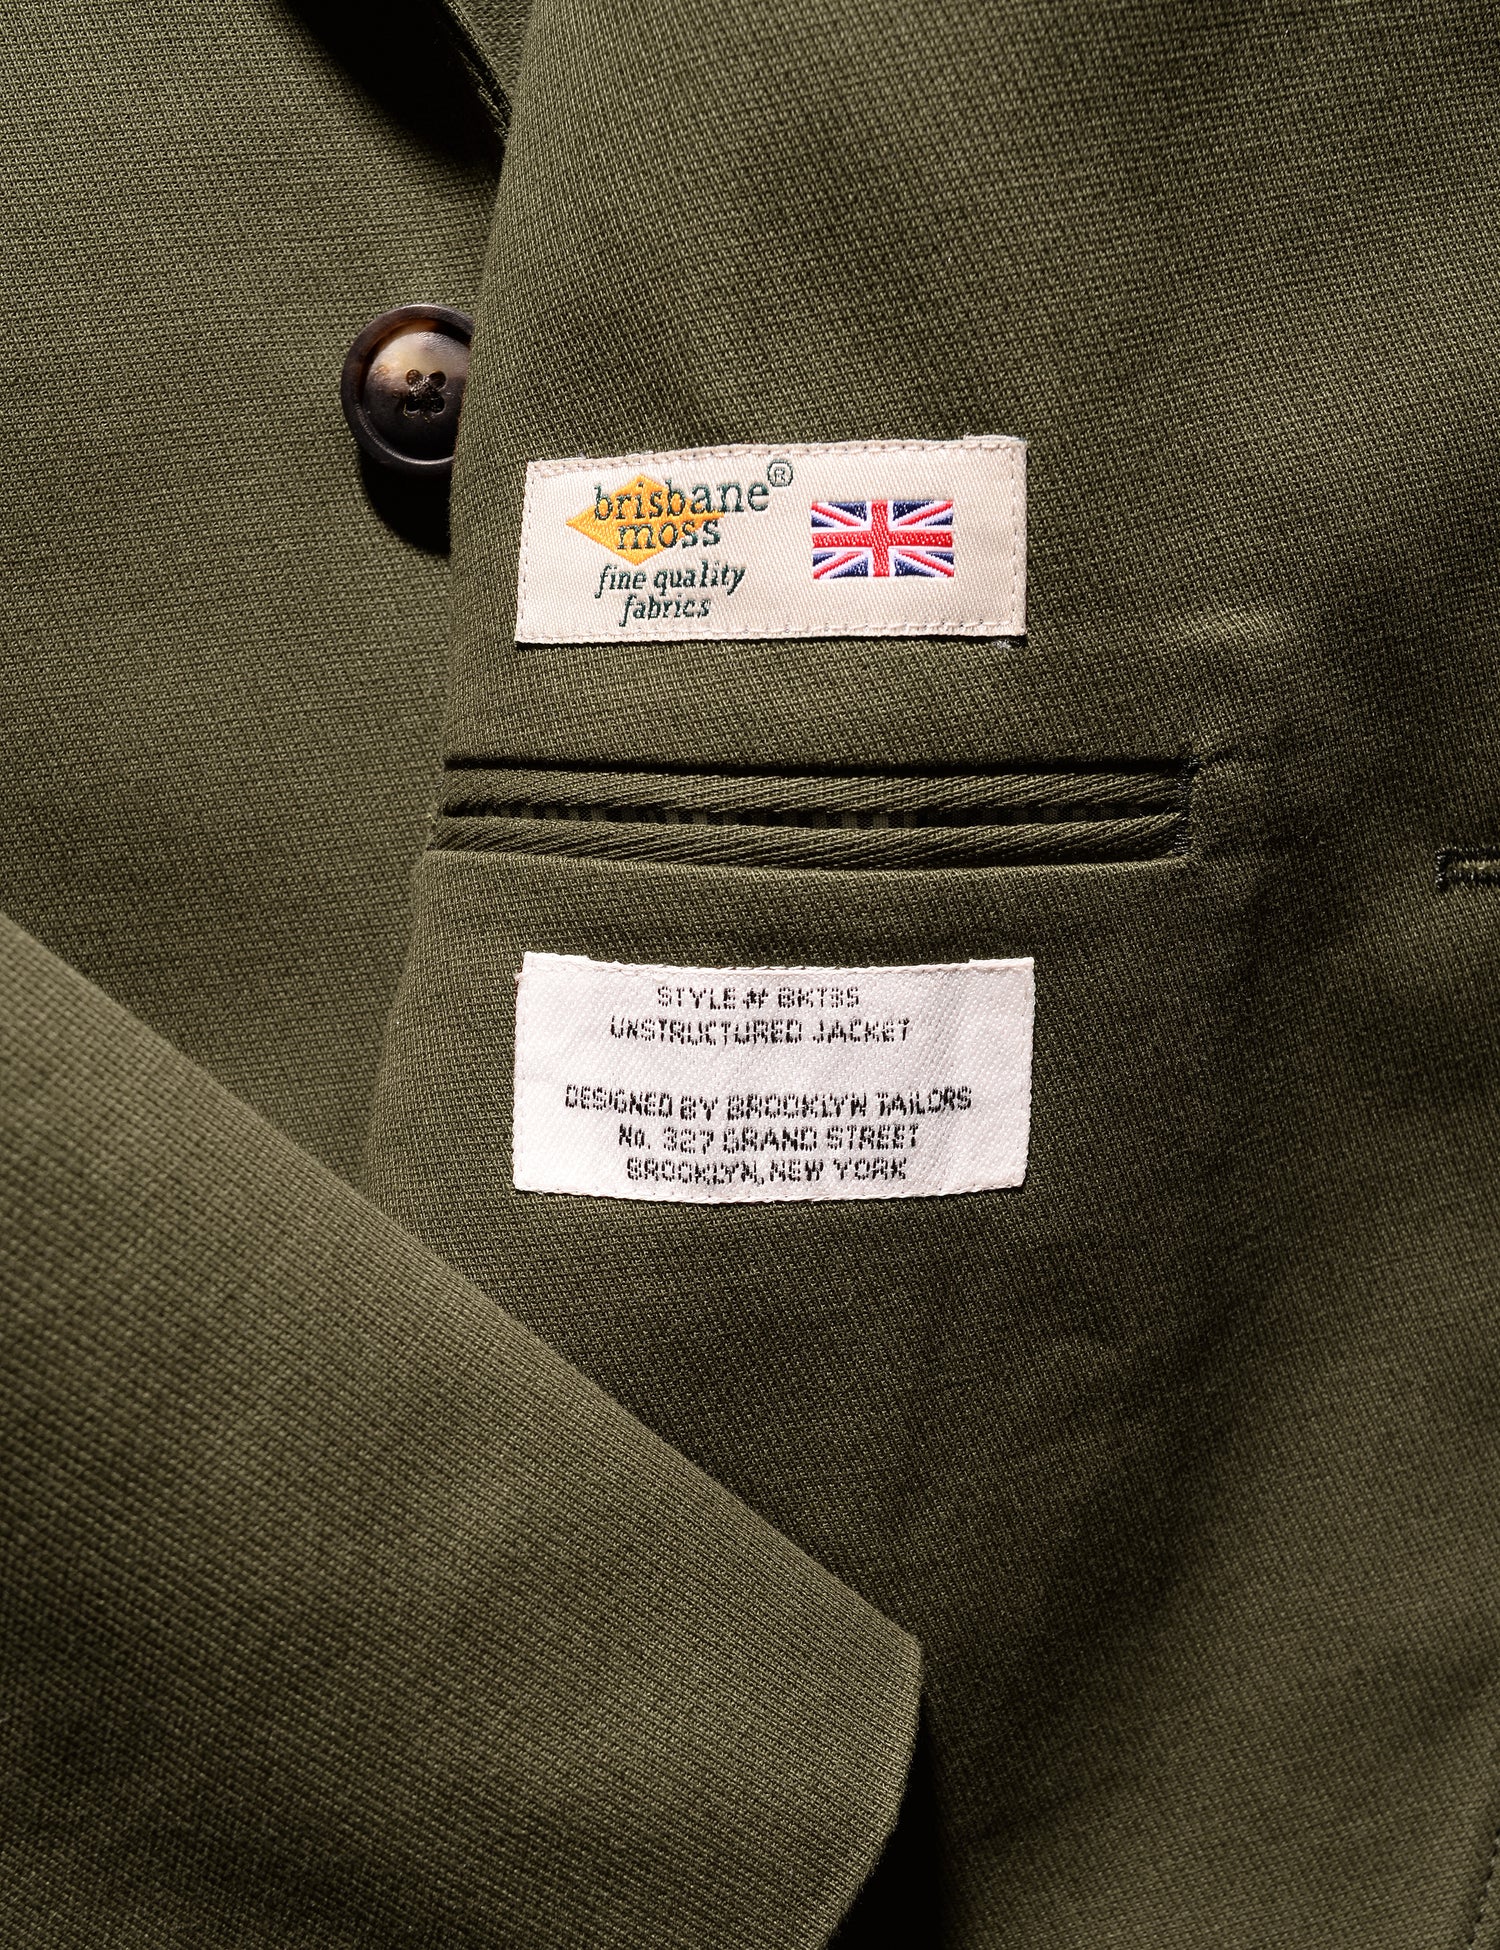 Detail shot showing Brisbane Moss label on interior of Brooklyn Tailors BKT35 Unstructured Jacket in Cavalry Twill - Olive